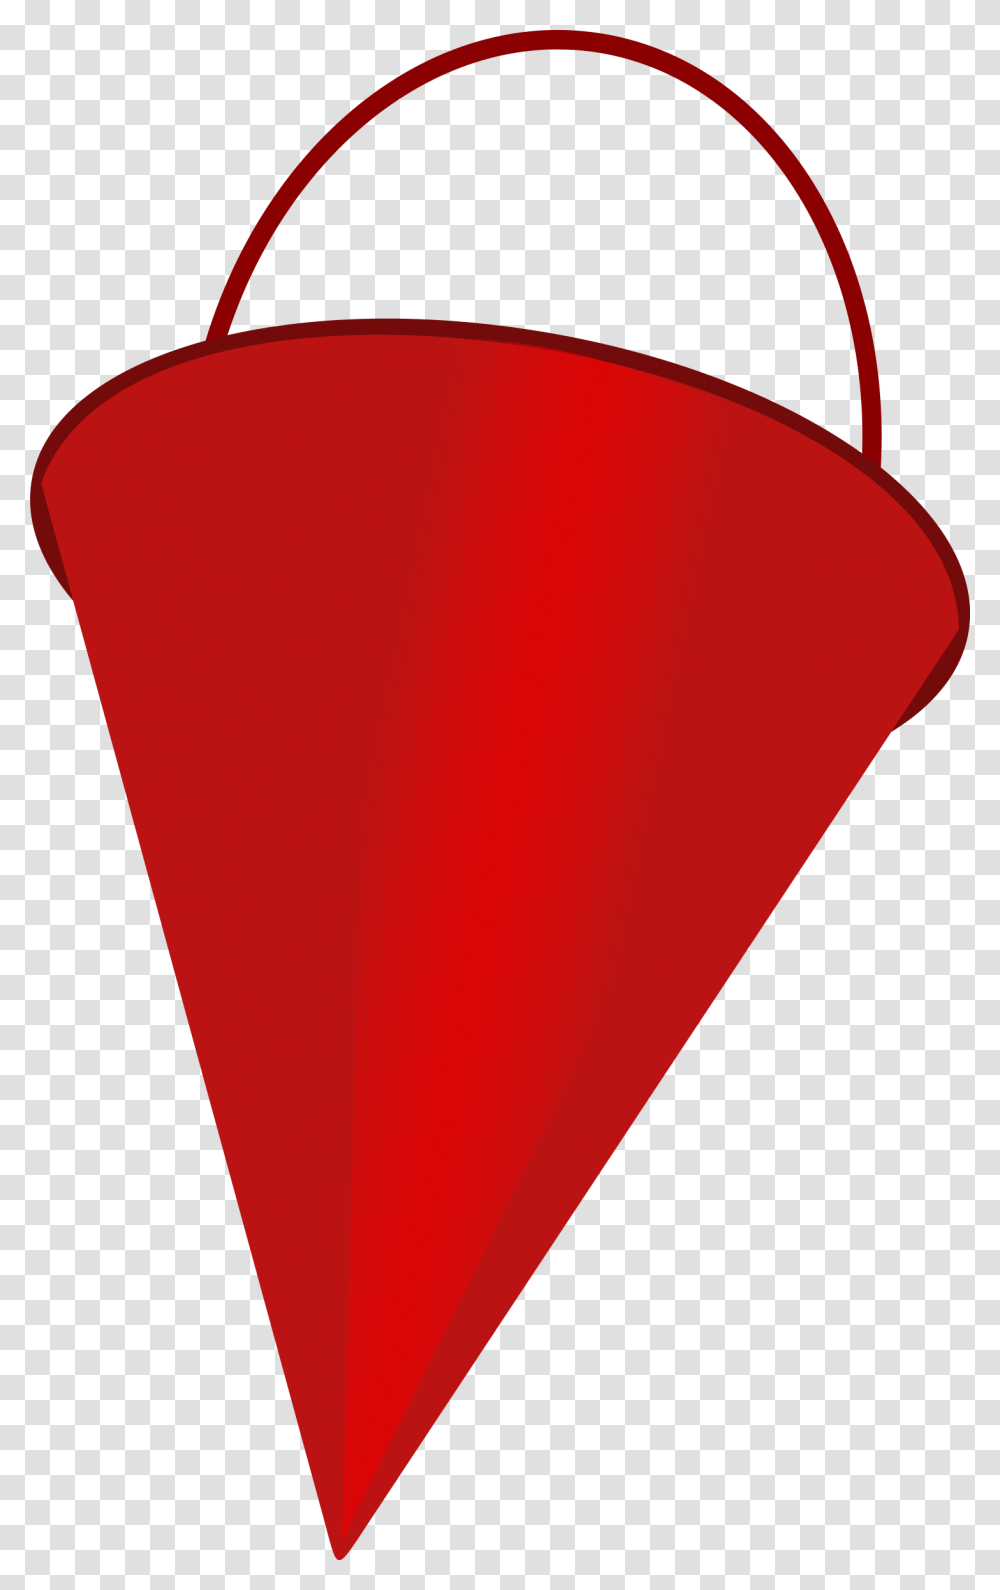 Hearttrianglered Bucket, Cone, Plant, Plectrum, Light Transparent Png